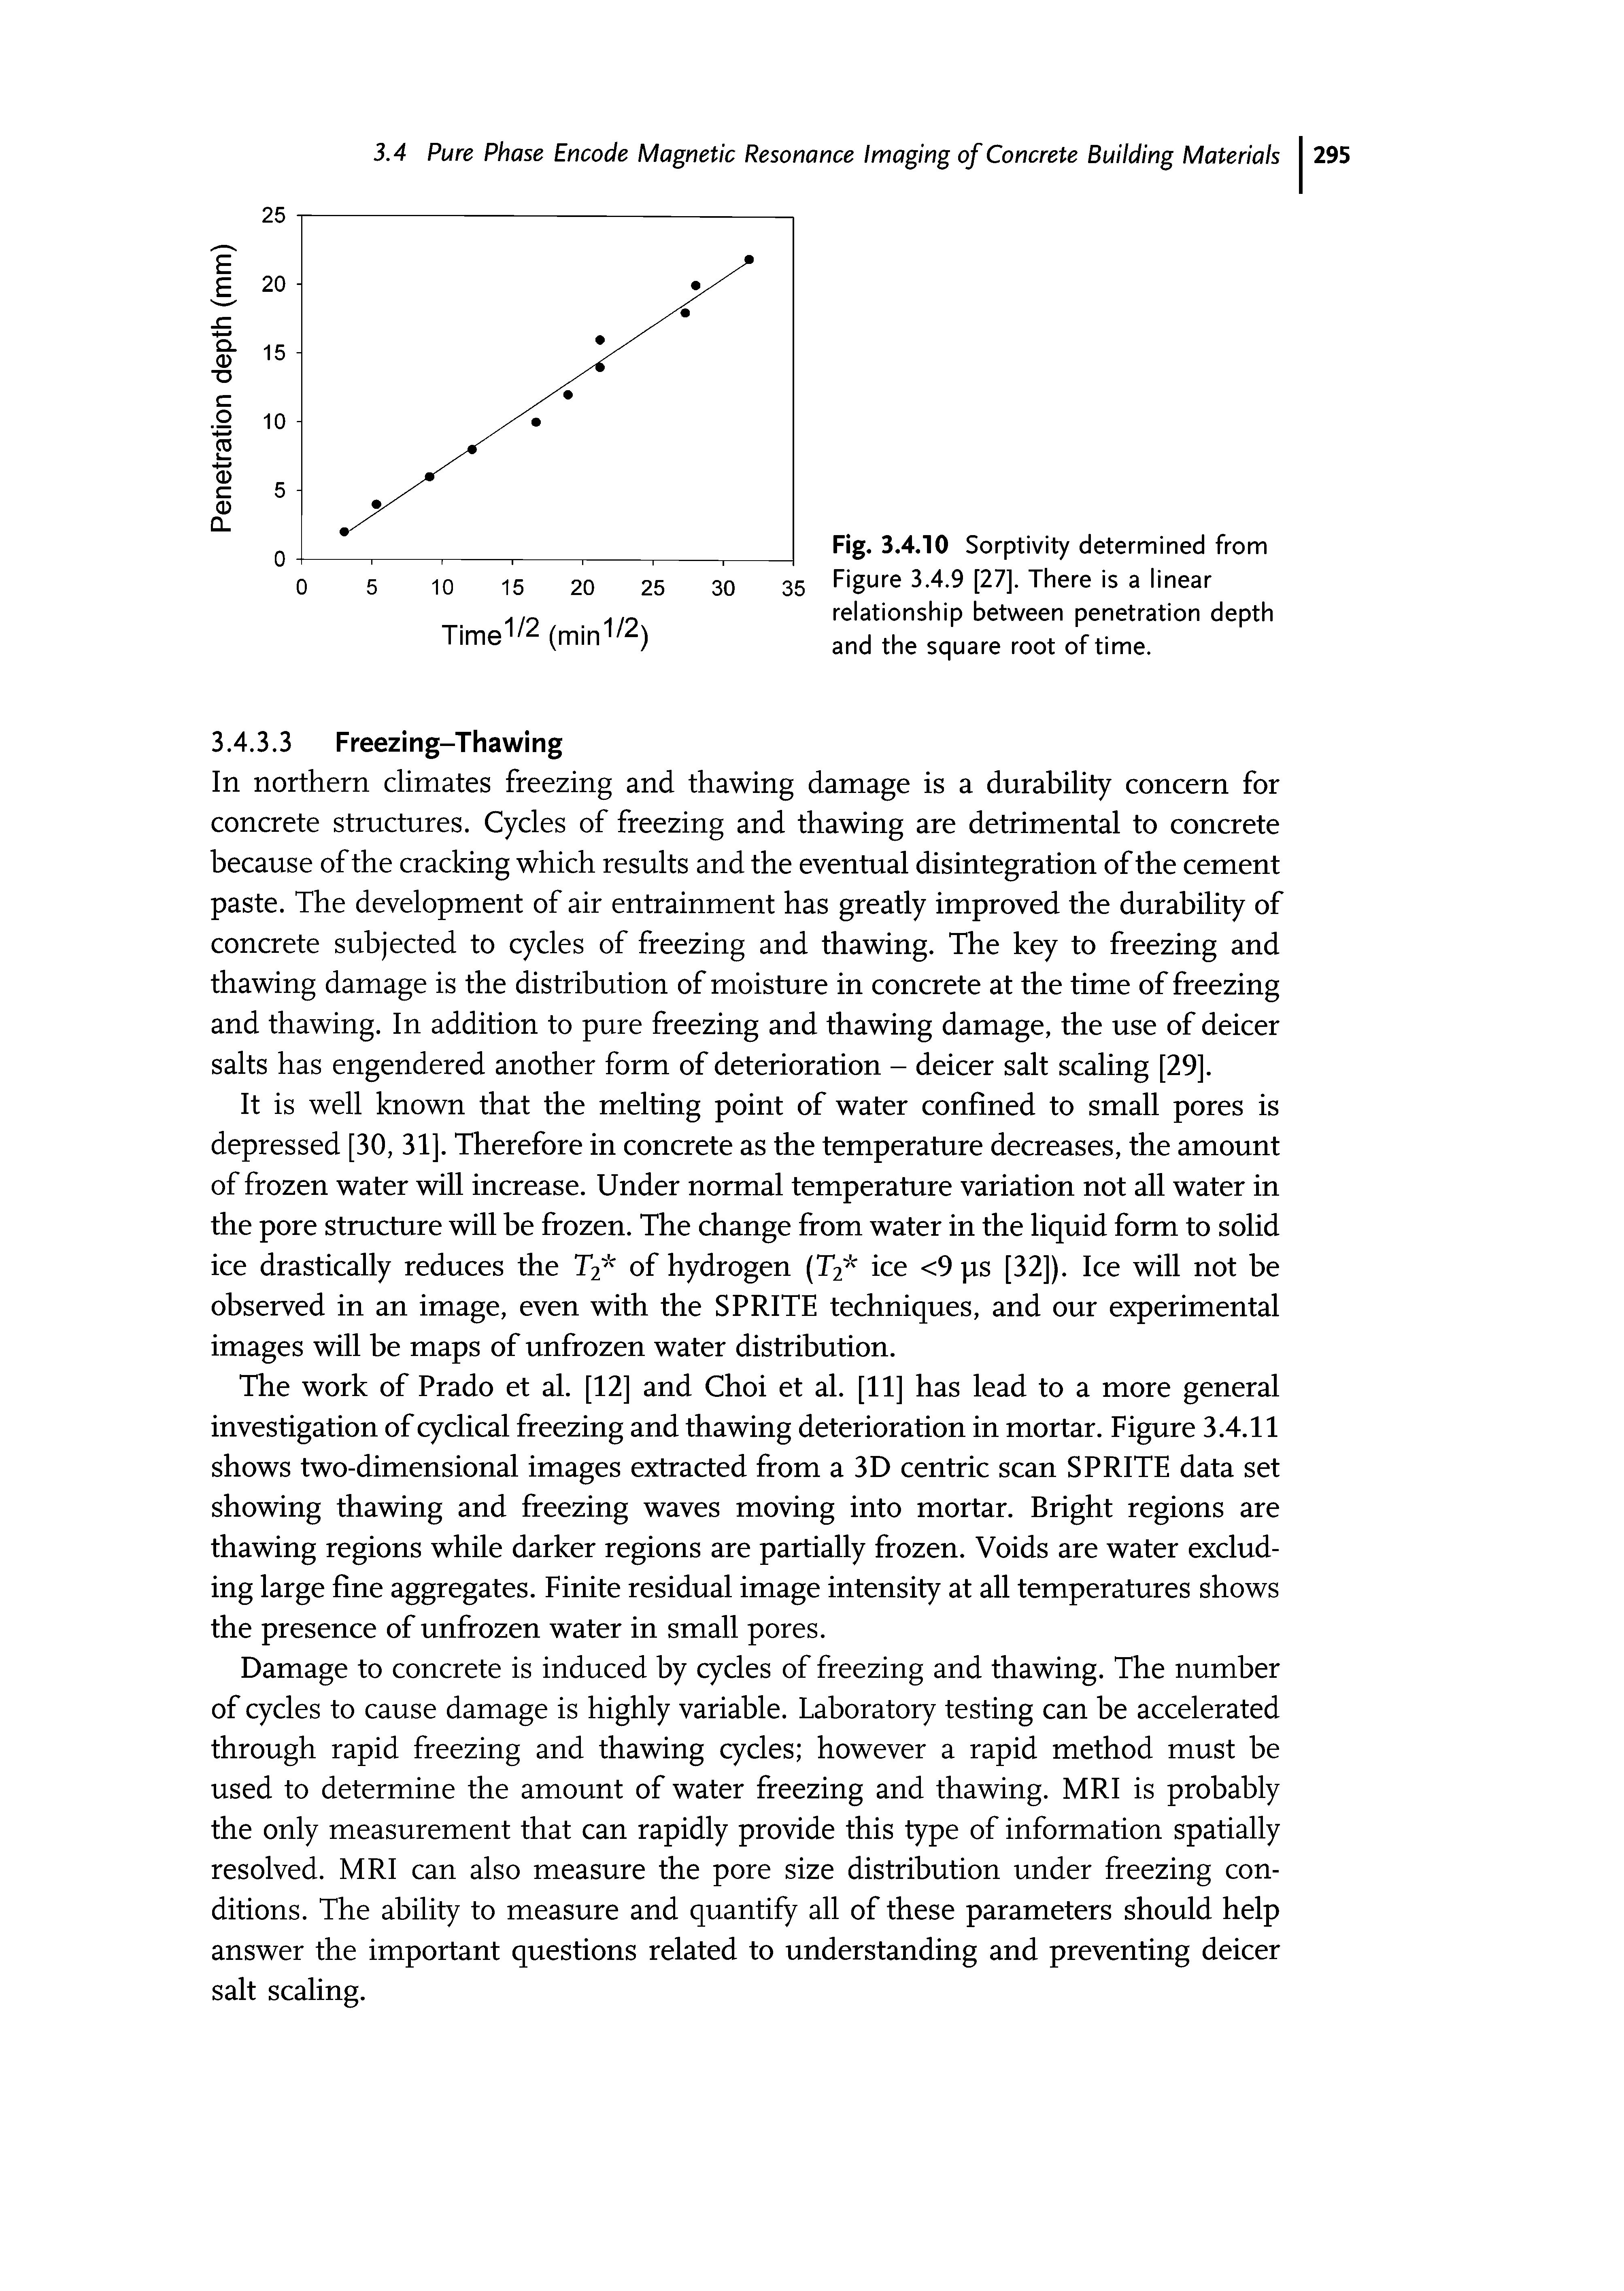 Fig. 3.4.10 Sorptivity determined from Figure 3.4.9 [27]. There is a linear relationship between penetration depth and the square root of time.